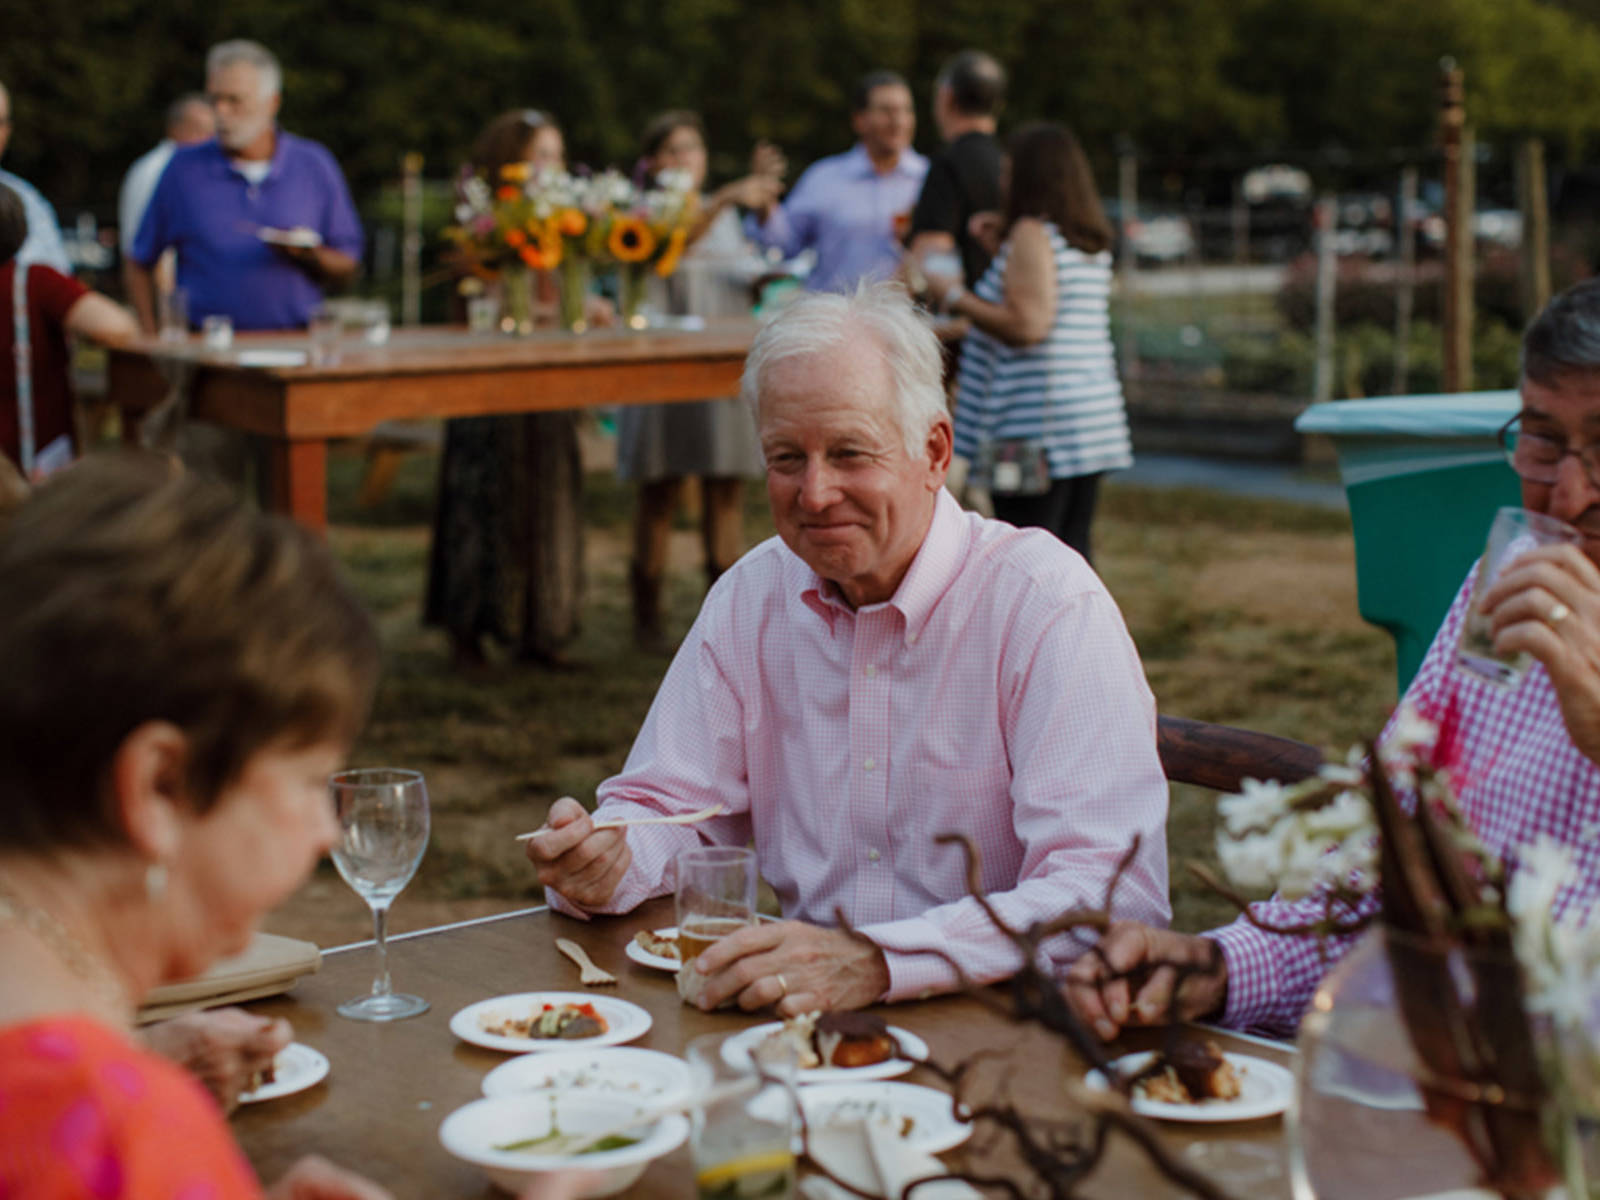 Shalom Farms | Group gathered at table eating at event